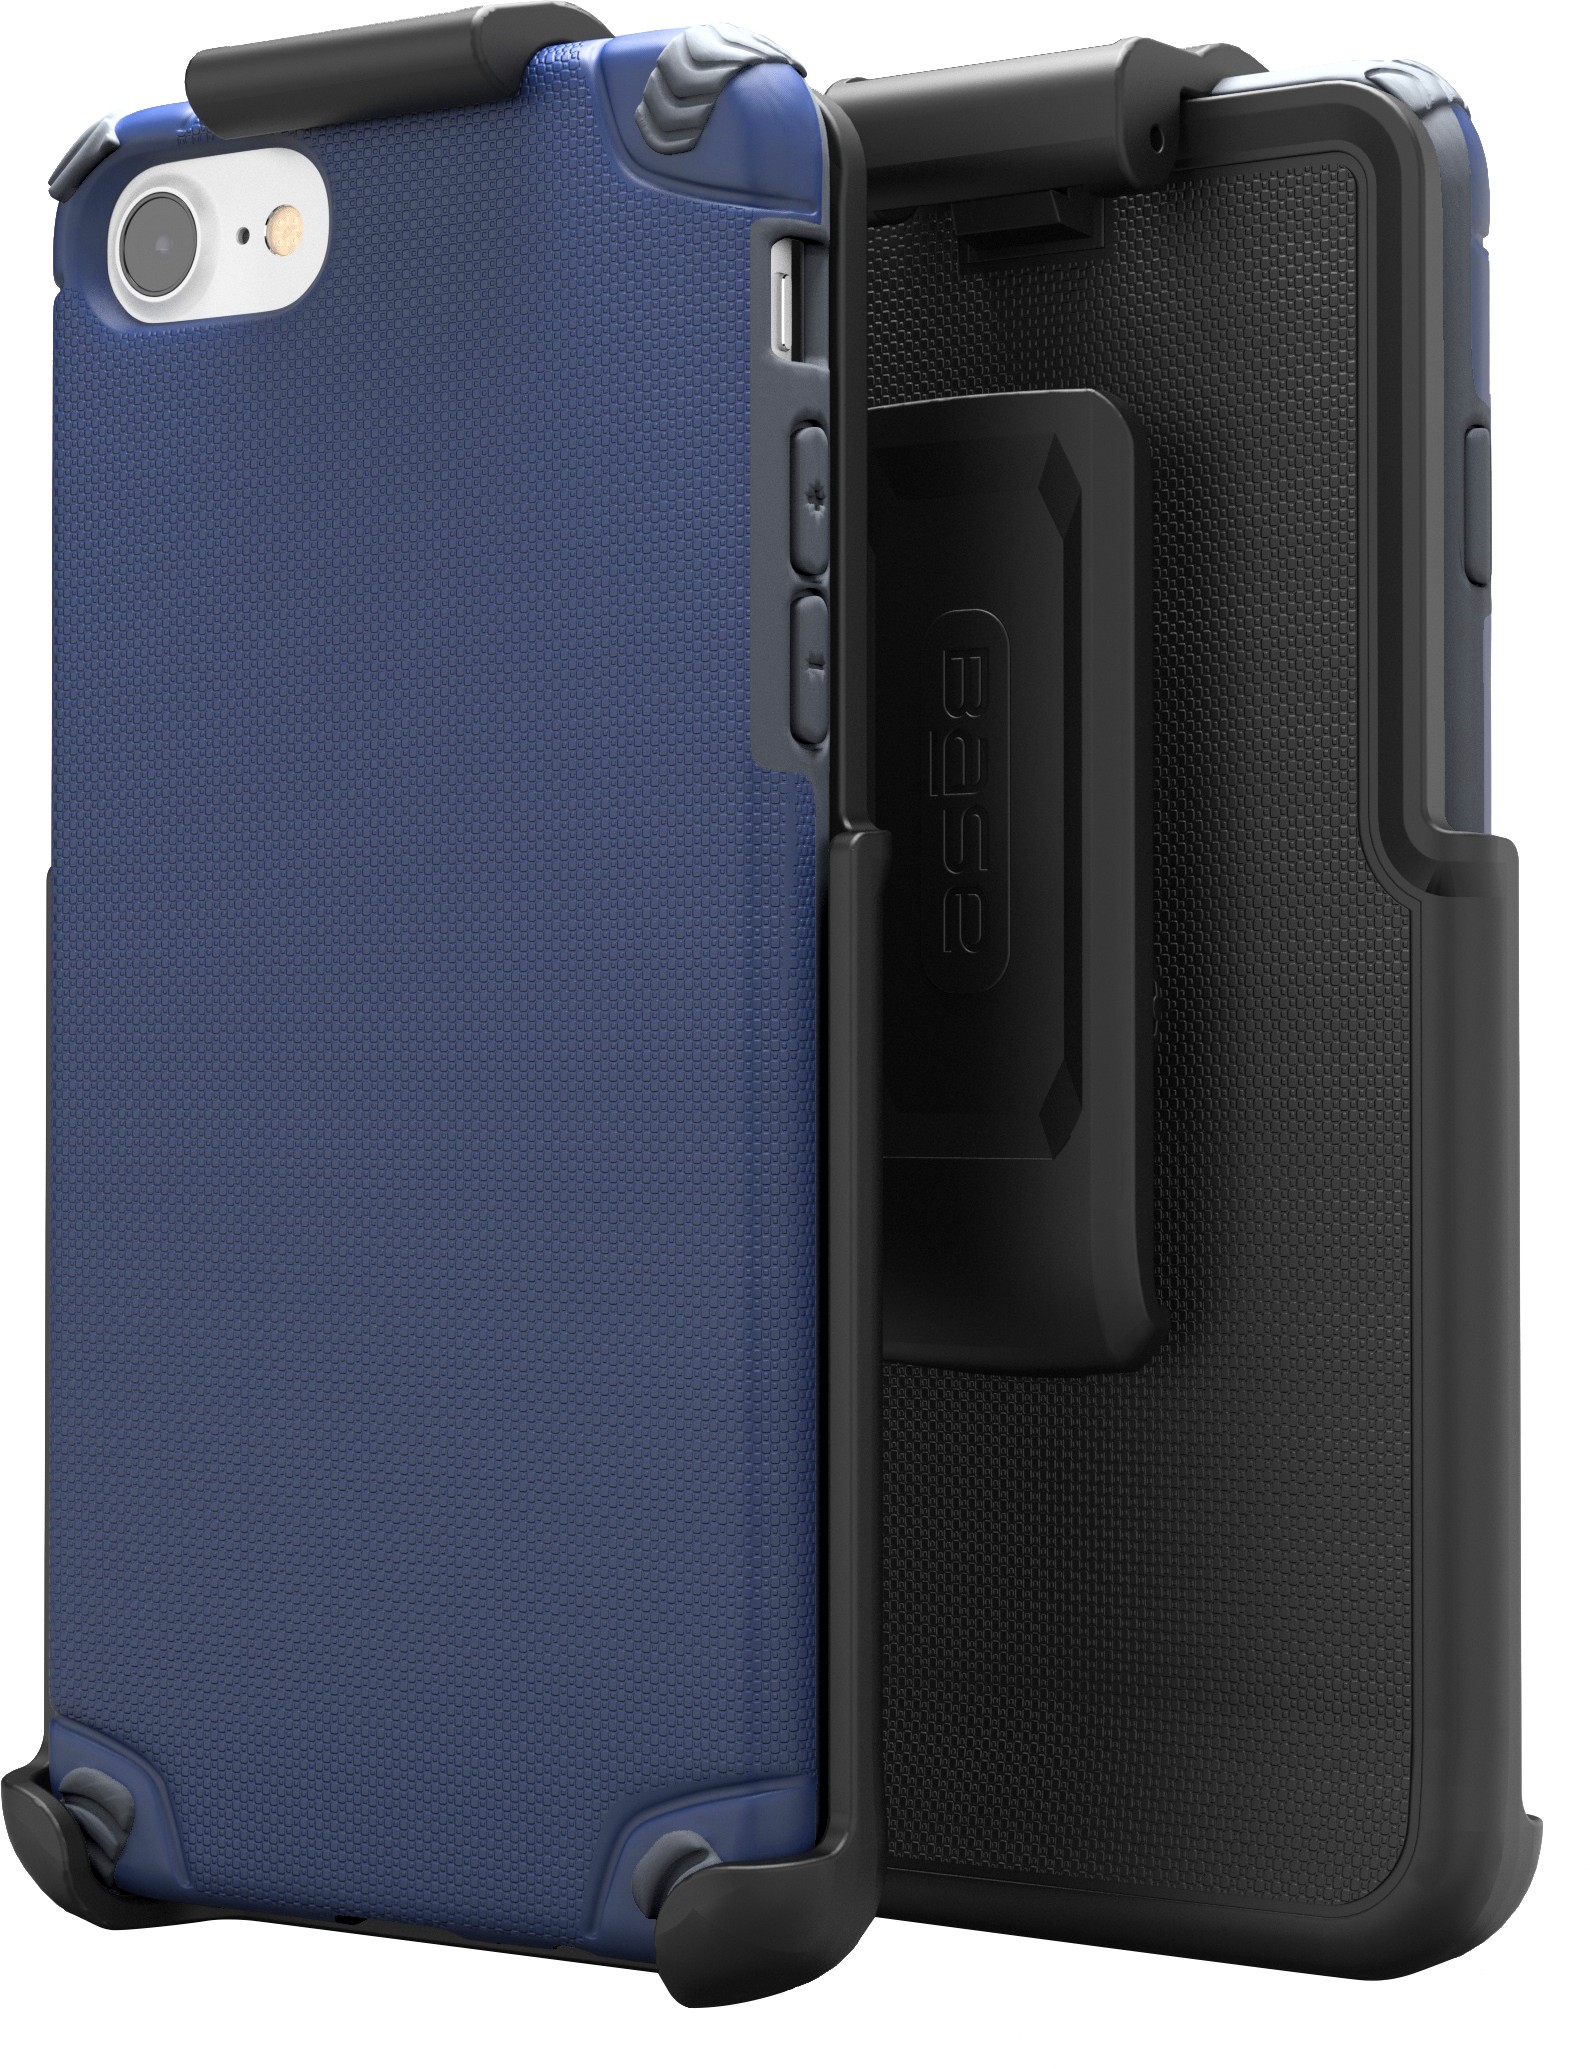 Base ProTech - Case & Holster Combo for iPhone 7/8 Plus - Blue